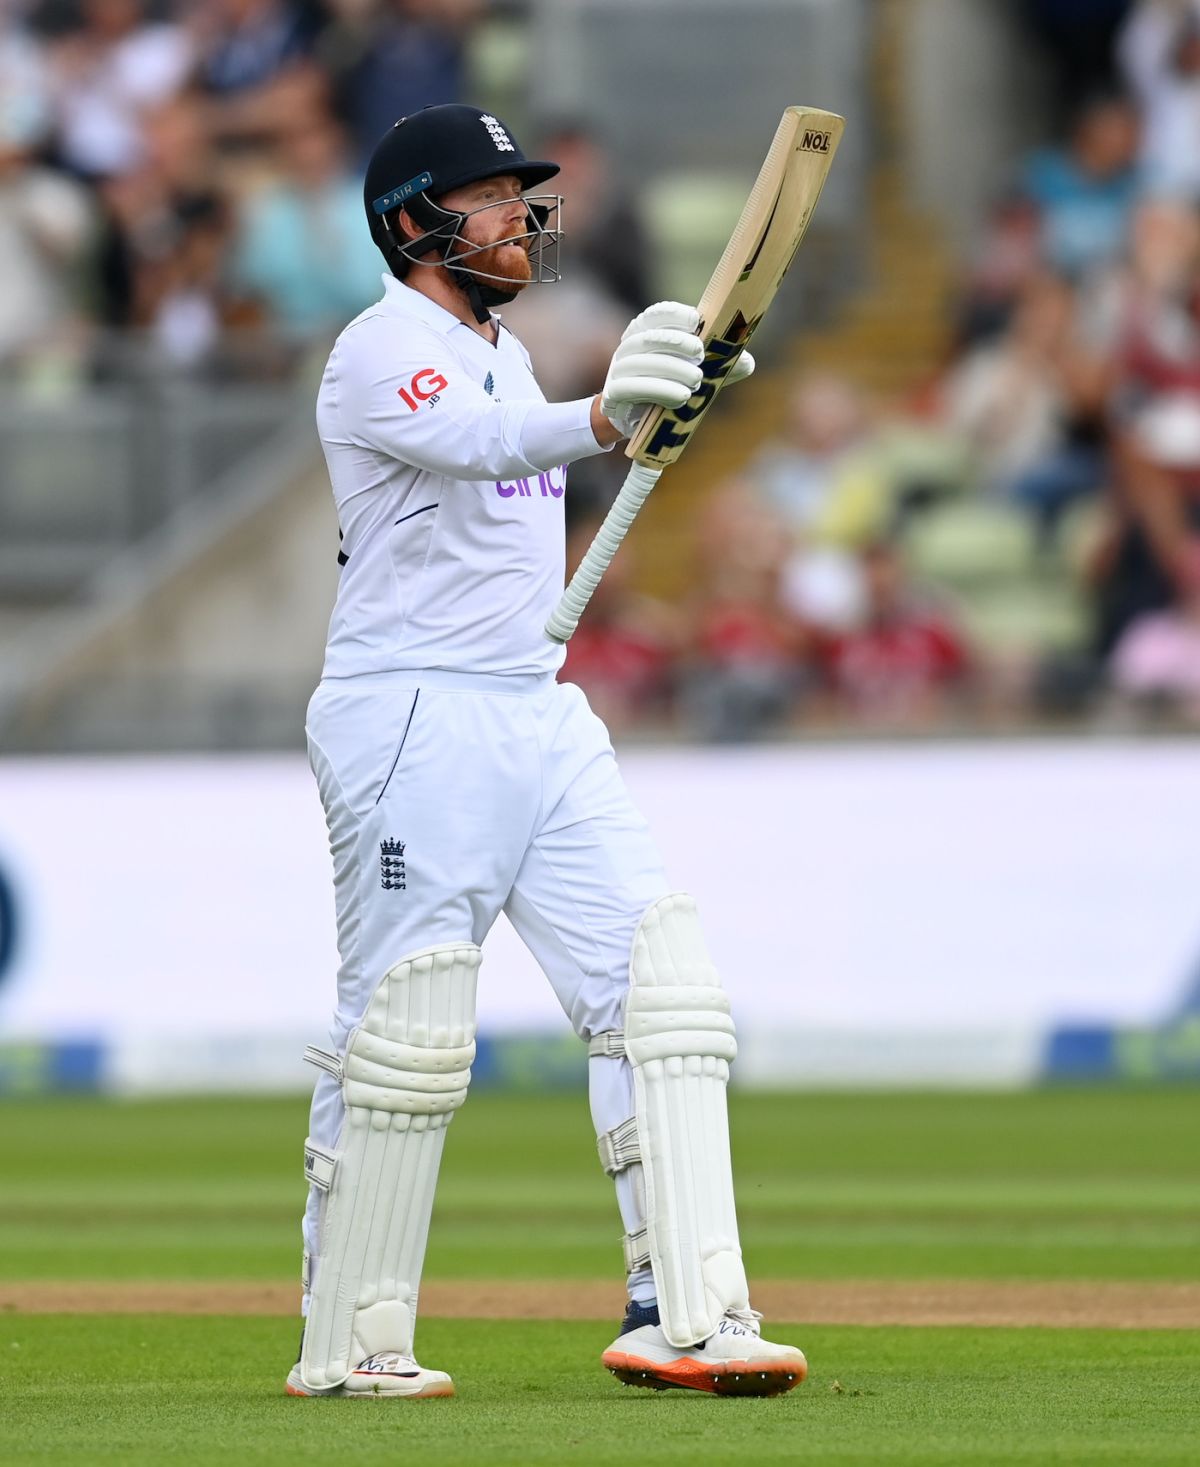 Jonny Bairstow raises his bat upon getting to another fifty, England vs India, 5th Test, Birmingham, 3rd Day, July 3, 2022
